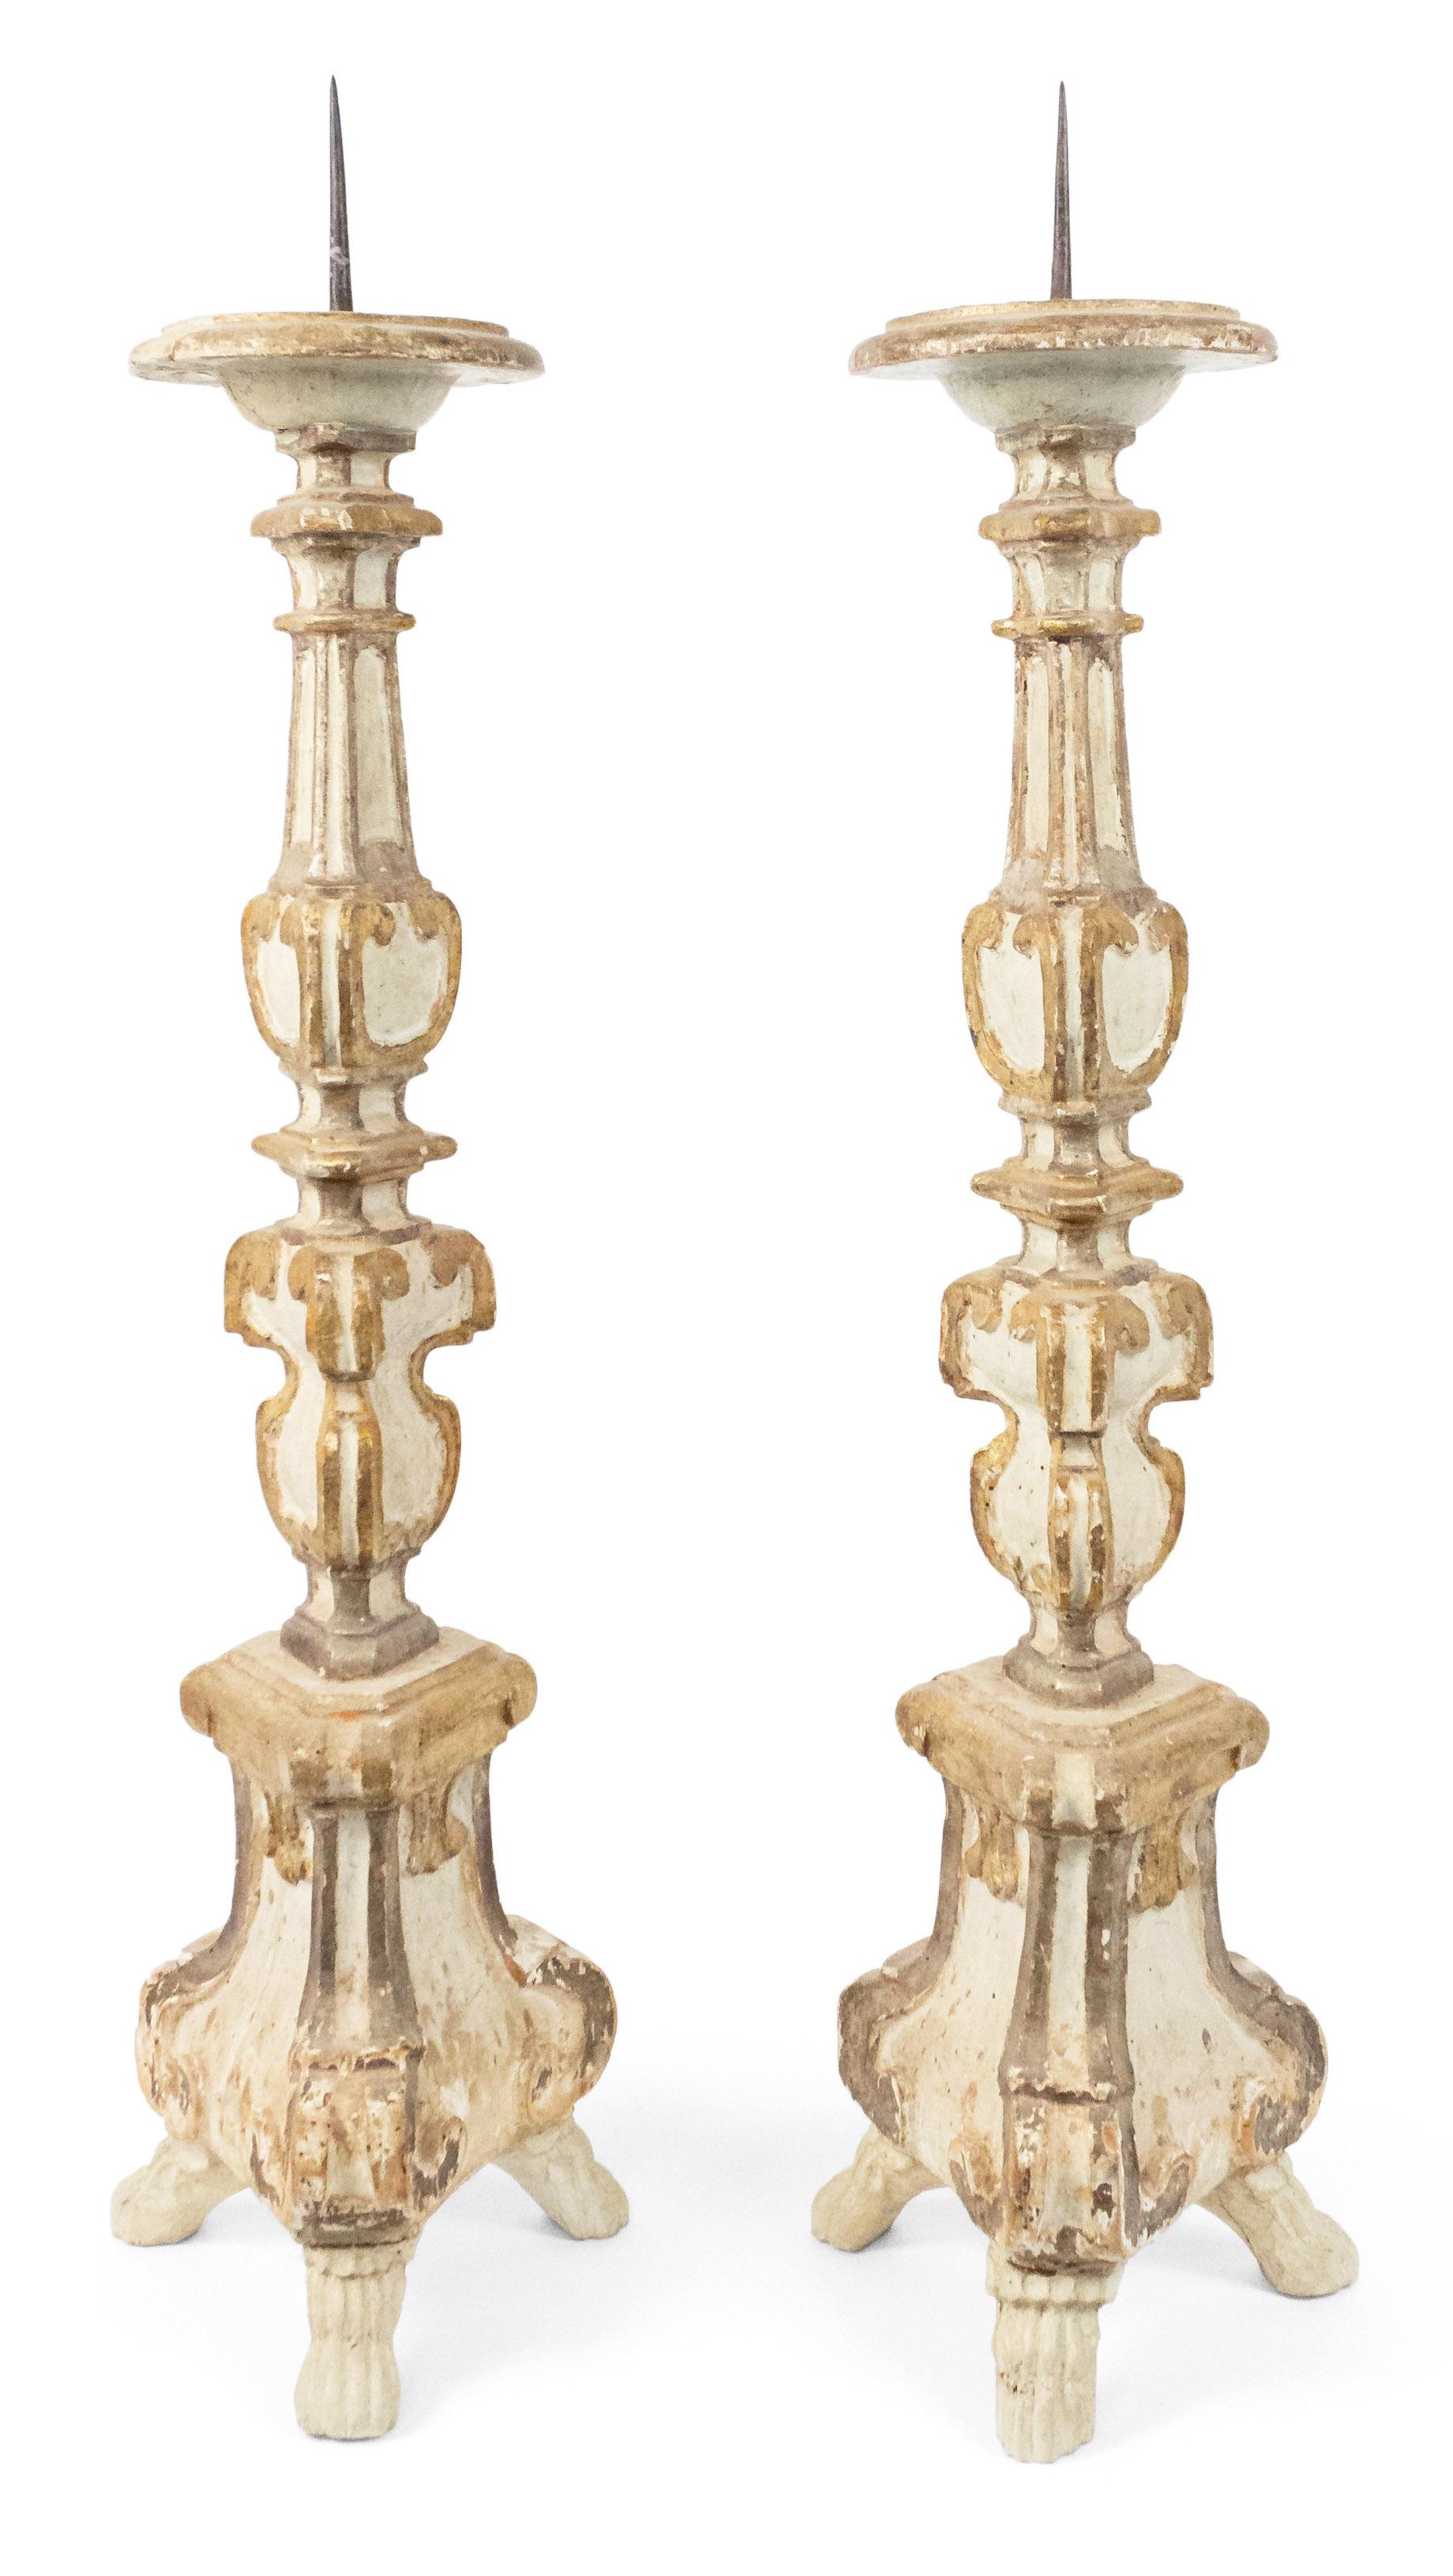 Pair of Italian Neoclassic White and Gilt Candlesticks For Sale 2